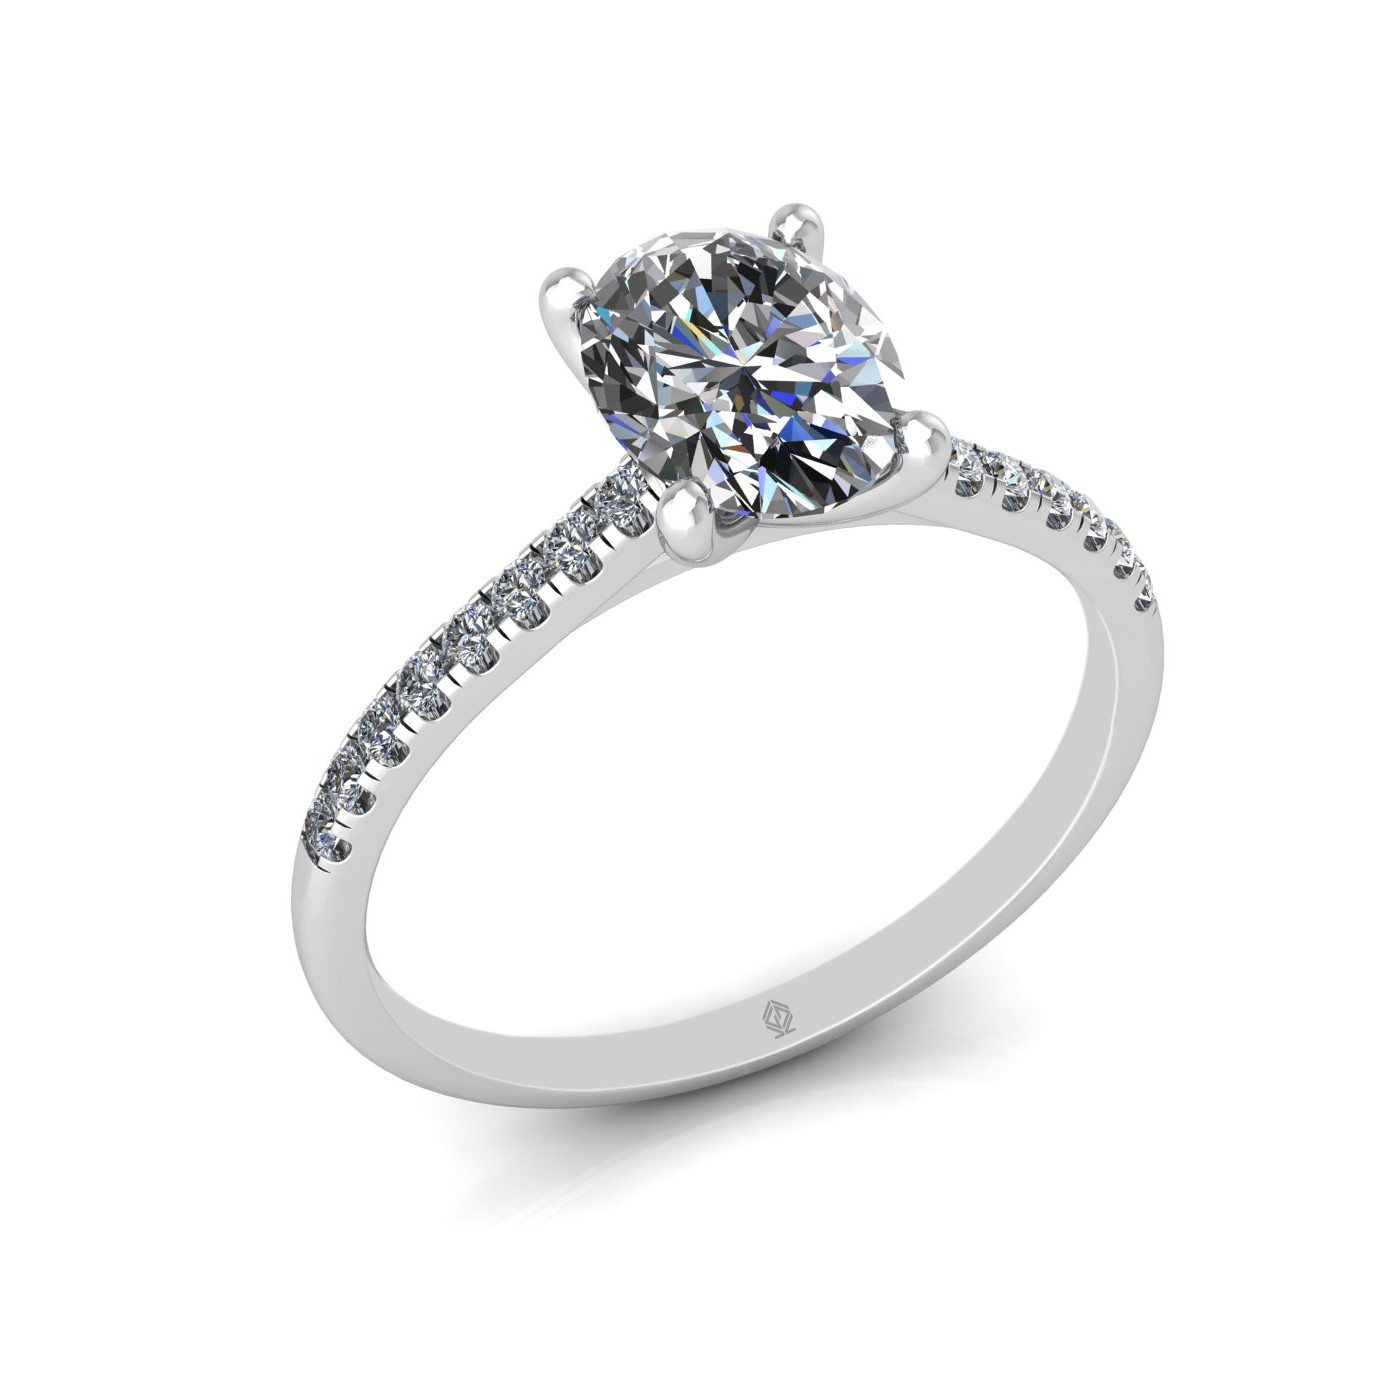 18k white gold  1,00 ct 4 prongs oval cut diamond engagement ring with whisper thin pavÉ set band Photos & images